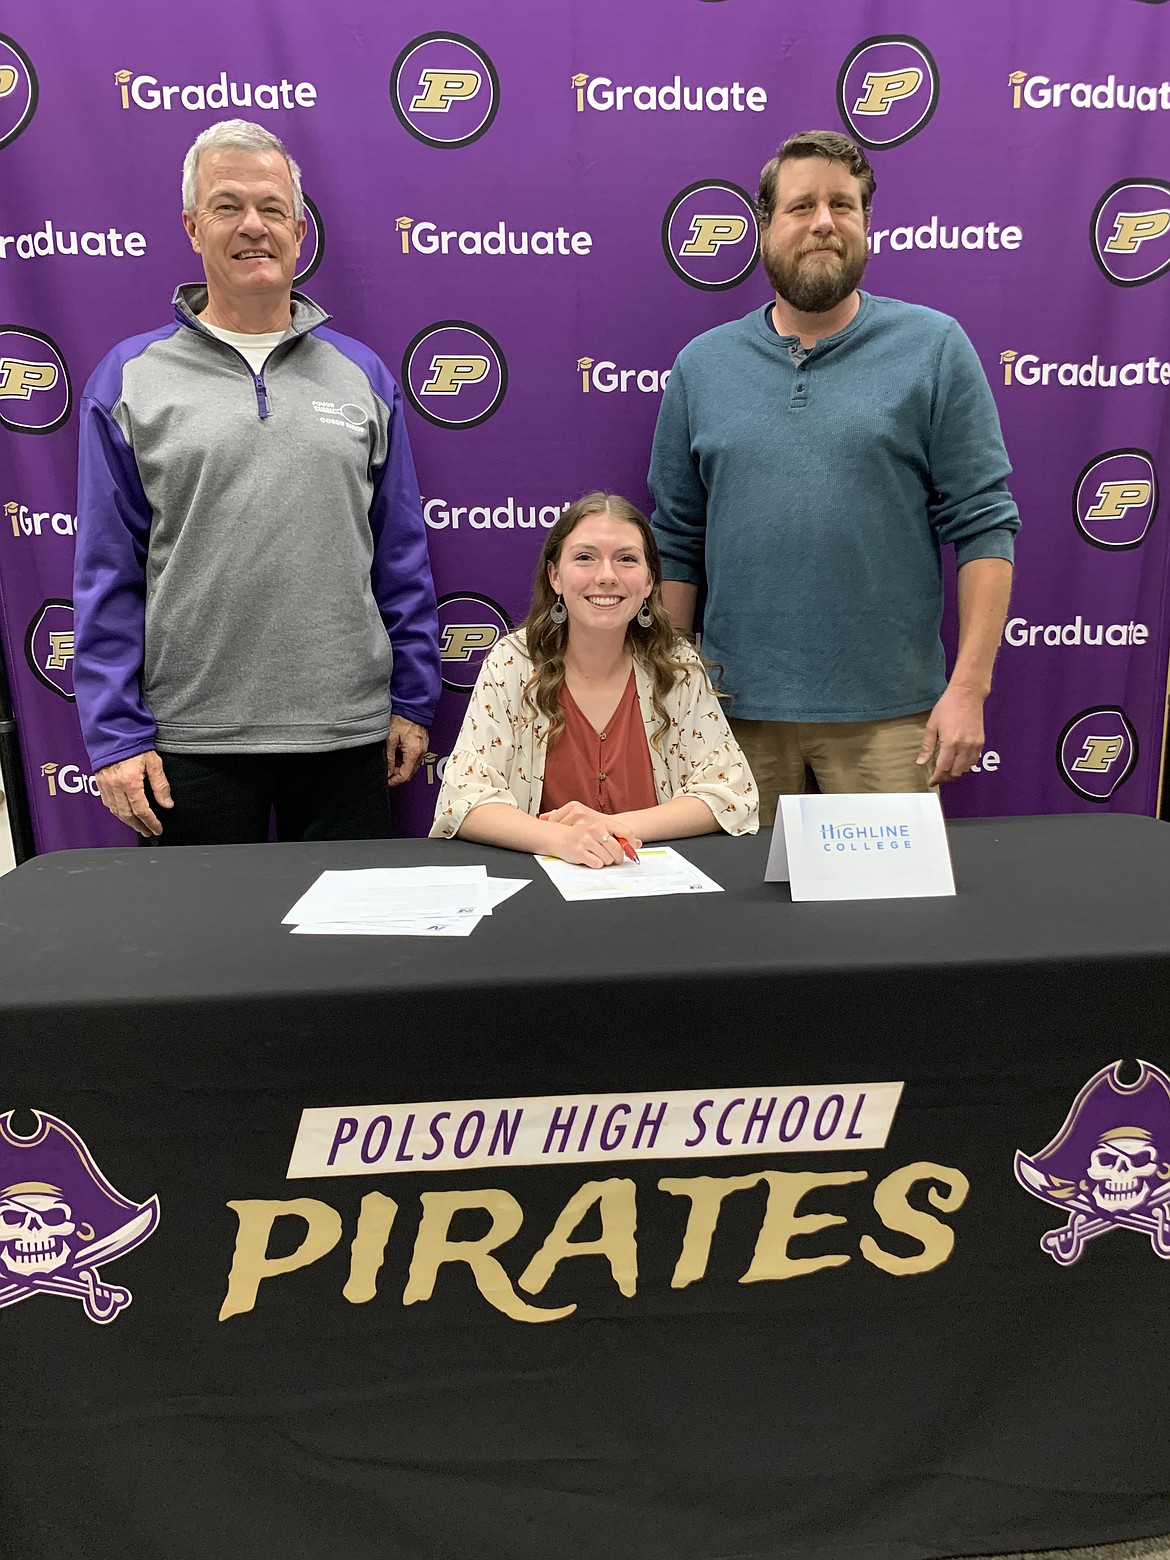 Megan Rost with Polson tennis coach Bob Hislop and her spring soccer coach, Jess Kittle, during a signing ceremony Aug. 26 at Polson High School. (Courtesy of Polson High School)